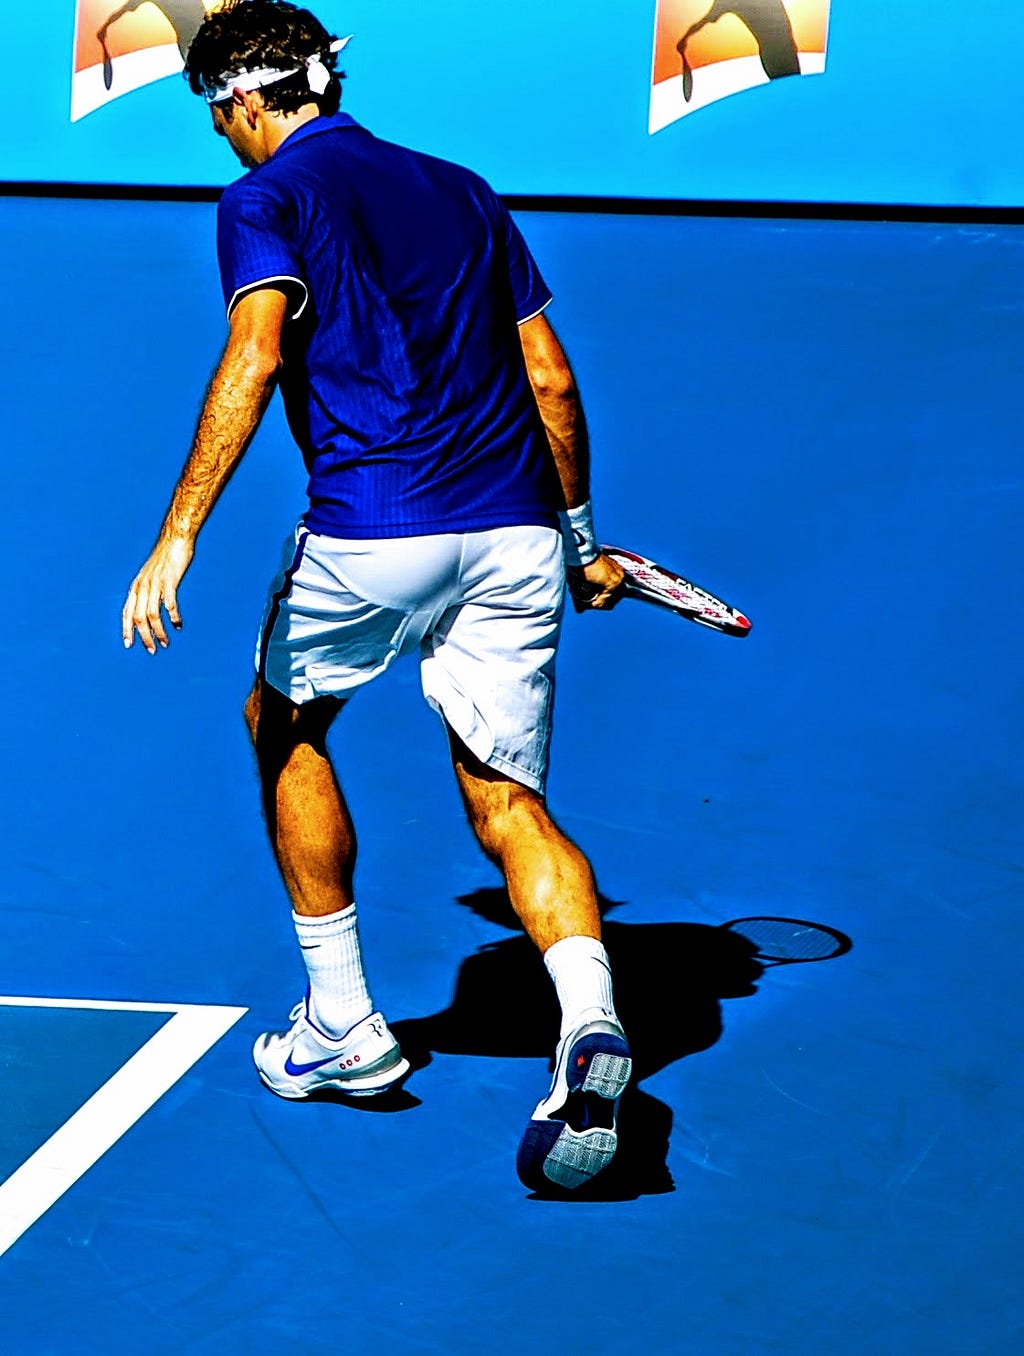 Roger Federer at the Australian Open playing in the Vapor Tennis shoes I helped create to build “Performance Product for the Players”